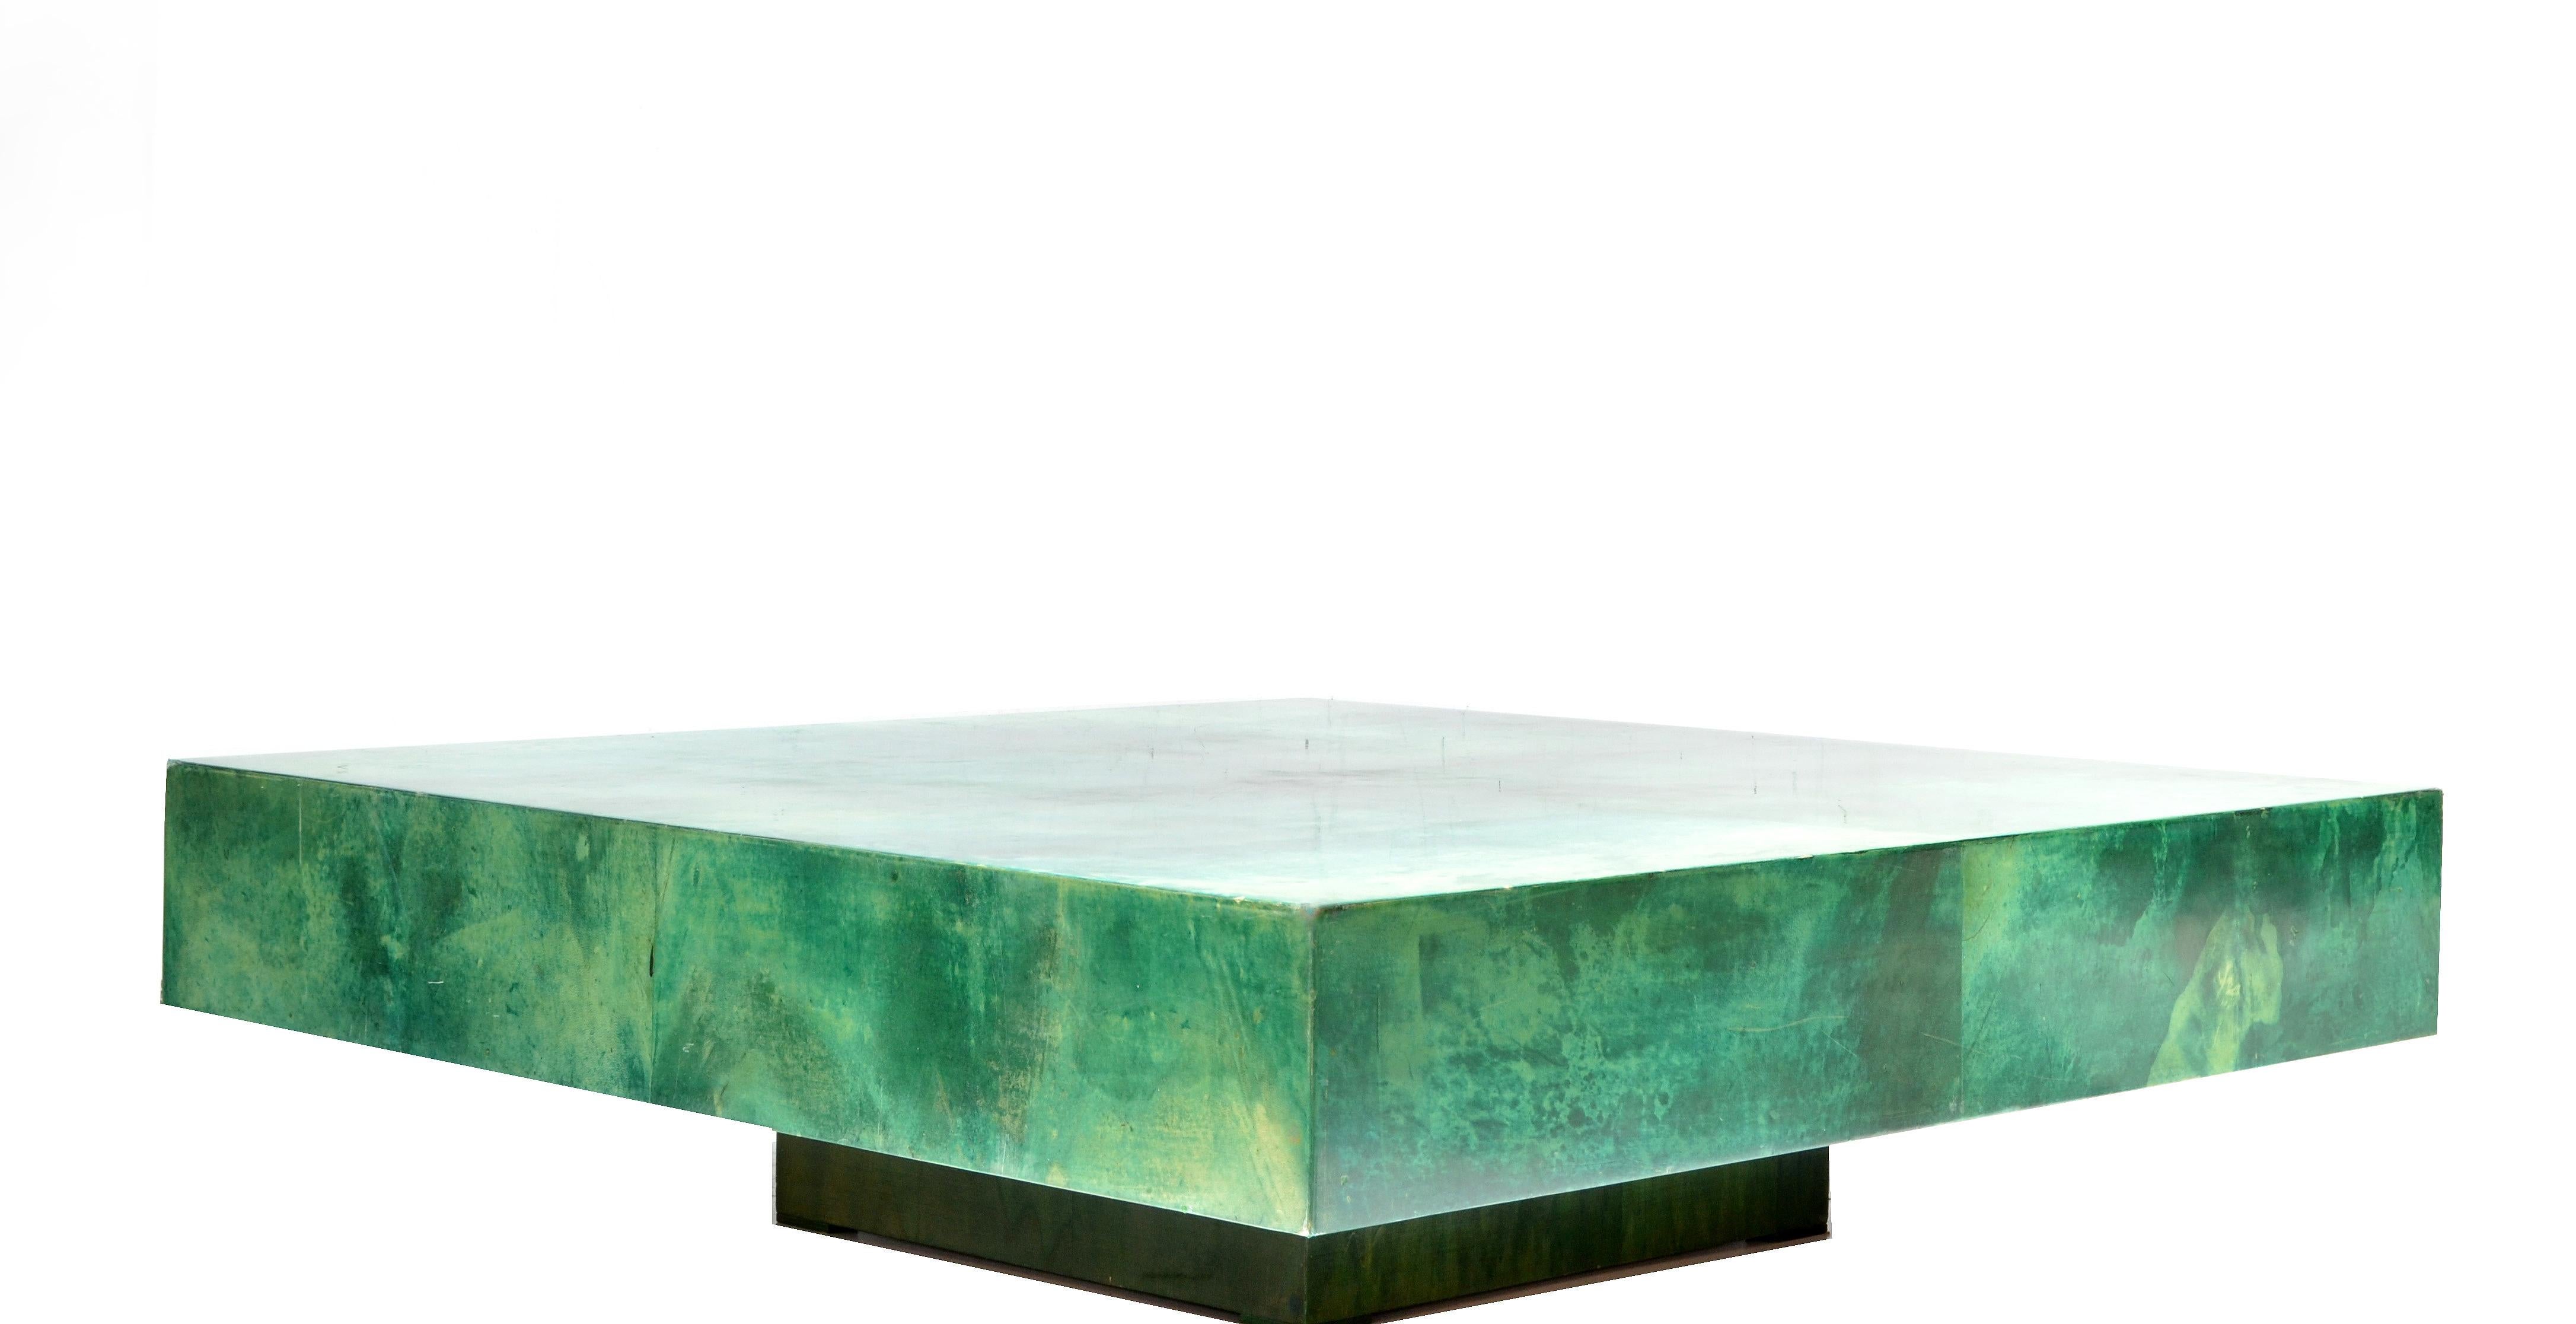 Huge Aldo Tura Coffee / Cocktail Table Emerald Green Lacquered Goatskin Top  4